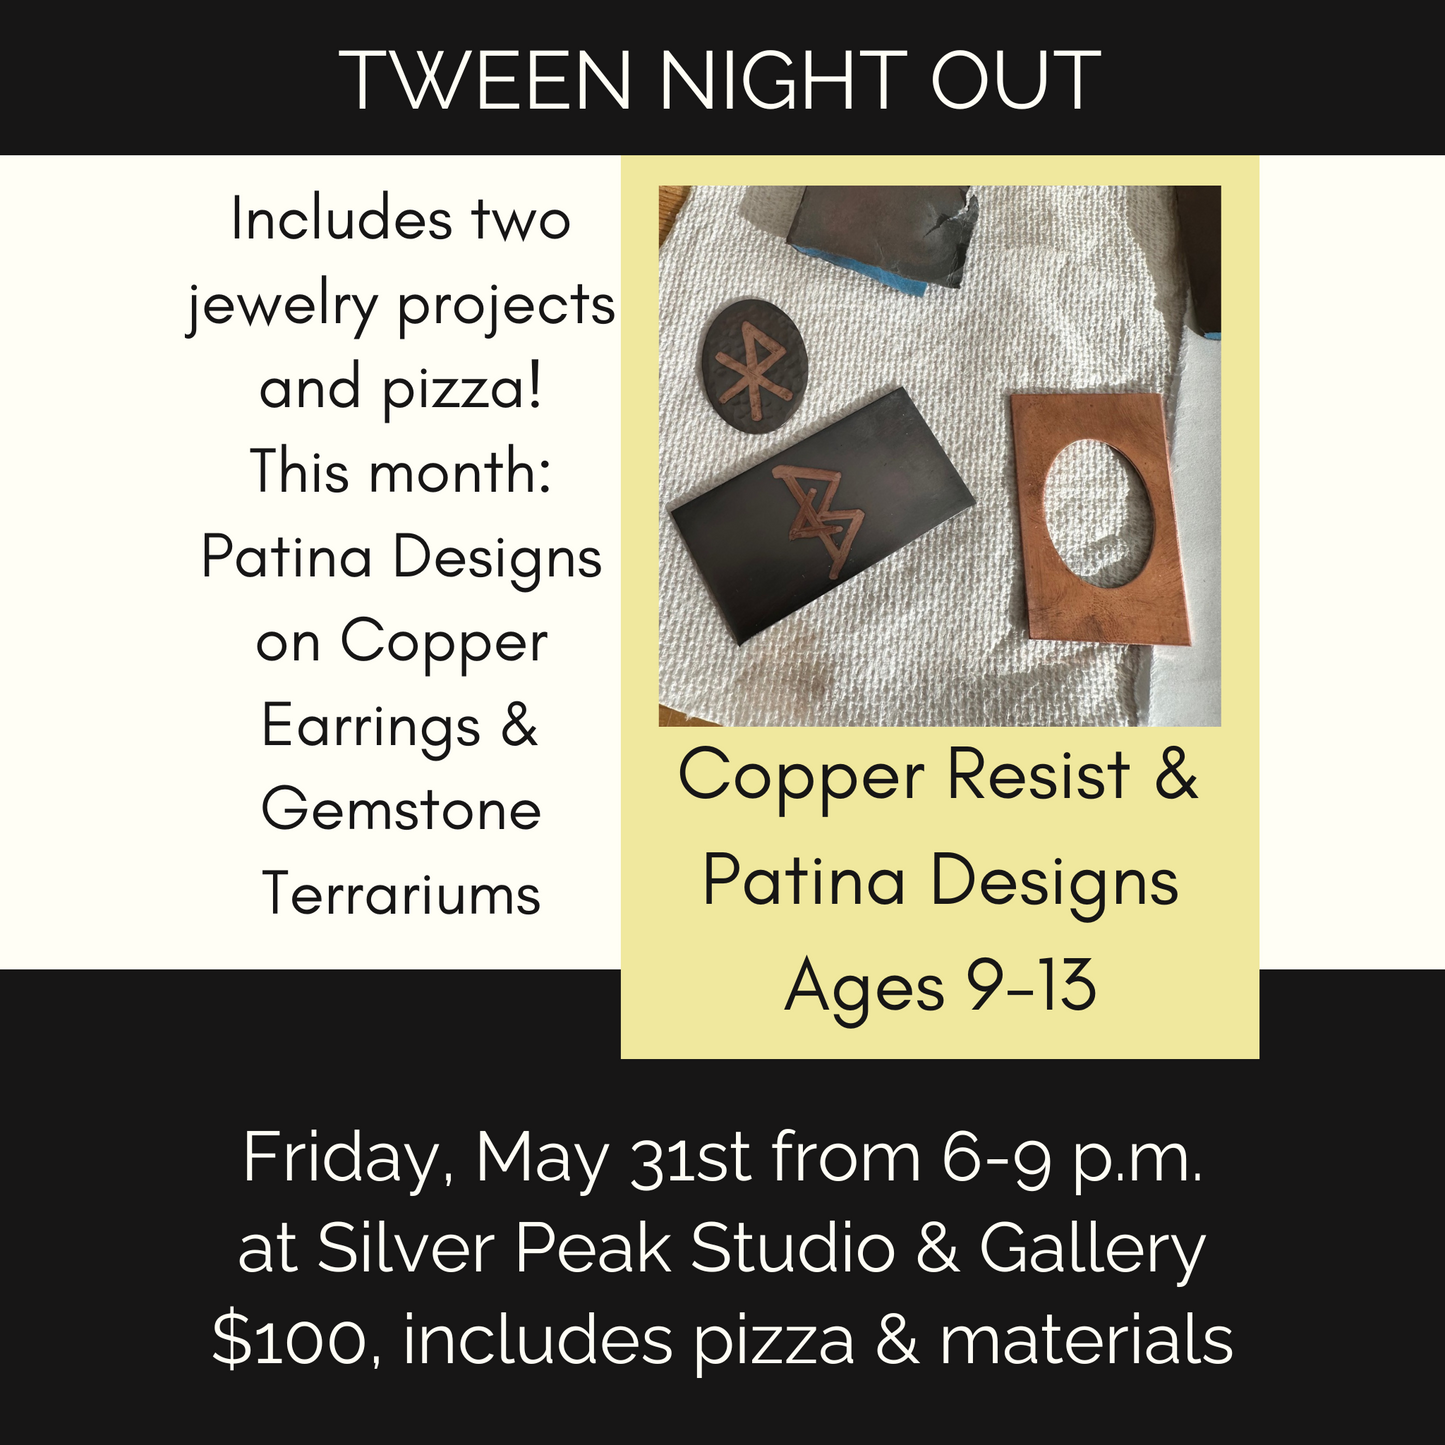 Tween Night Out: Ages 9-13: May 31st